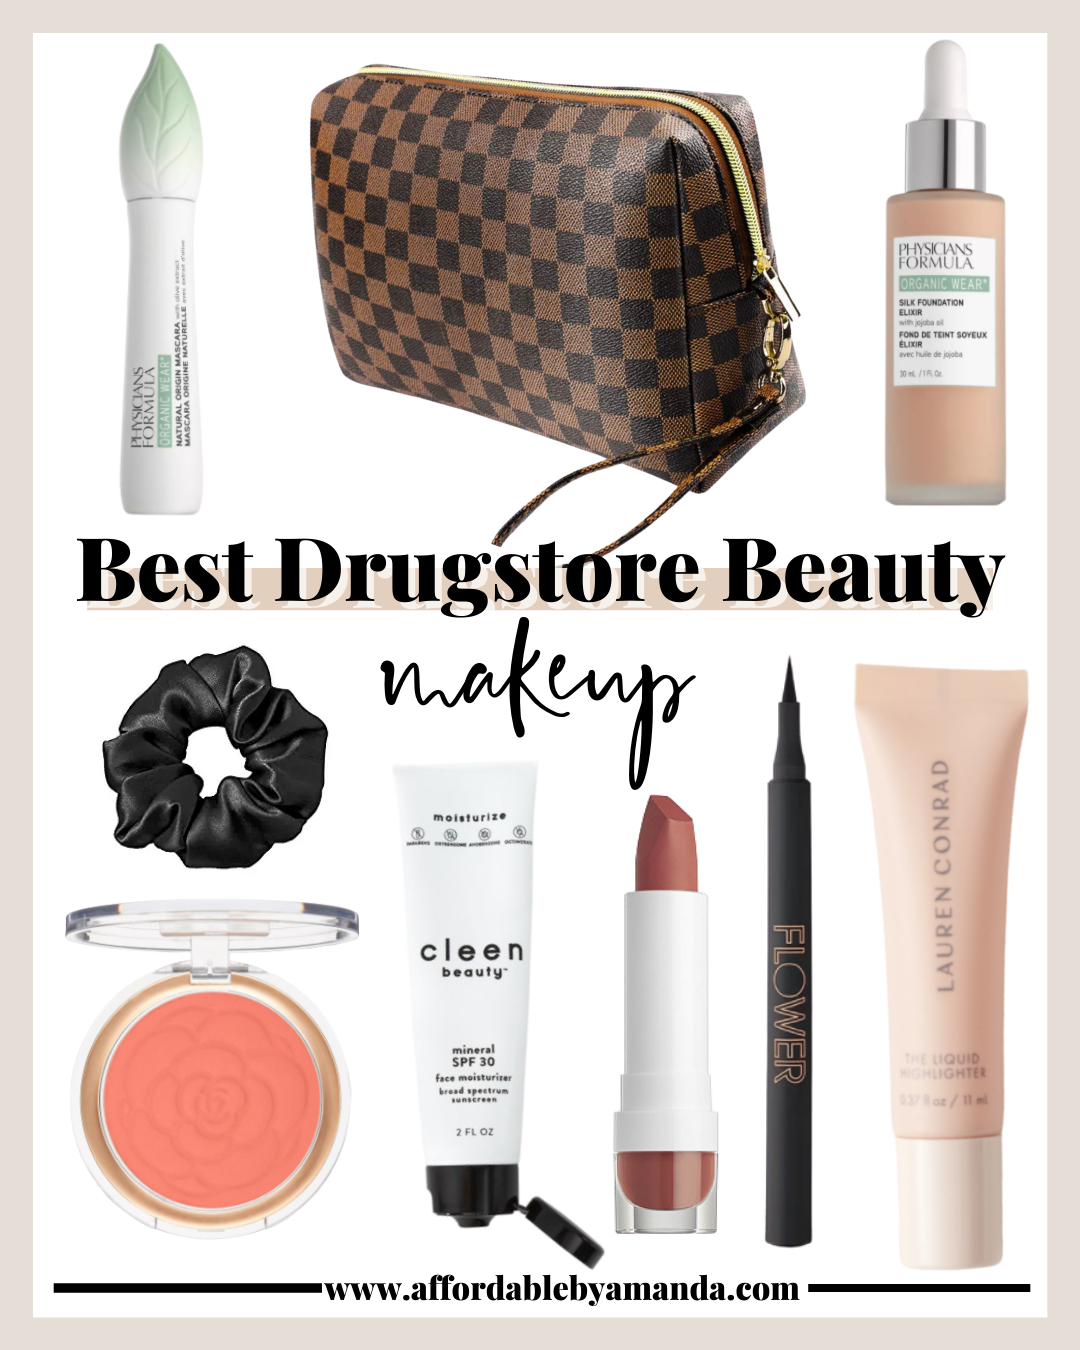 Best Drugstore Beauty 2020 - Best Drugstore Makeup Products | Affordable by Amanda